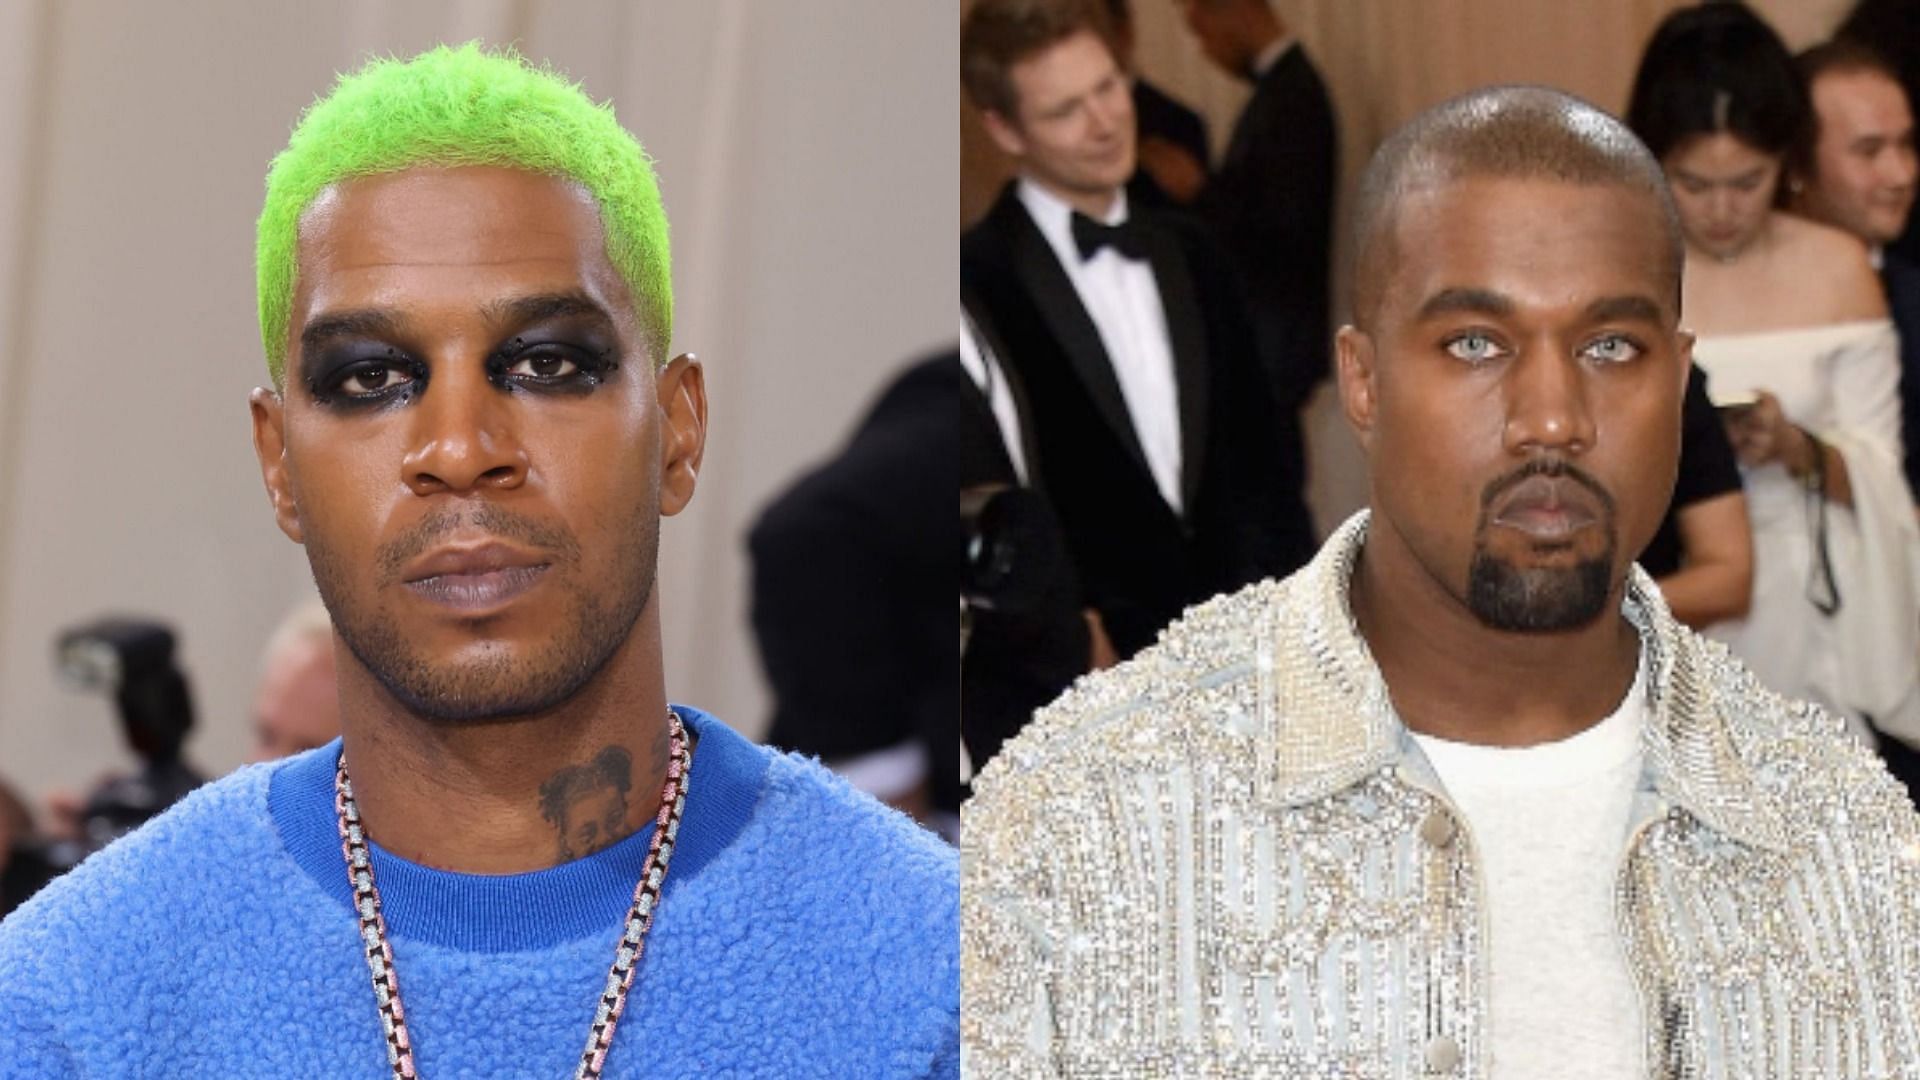 Kid Cudi recently revealed that he is still not friends with Kanye West after their beef earlier this year (Image via Taylor Hill/WireImage and John Shearer/Getty Images)